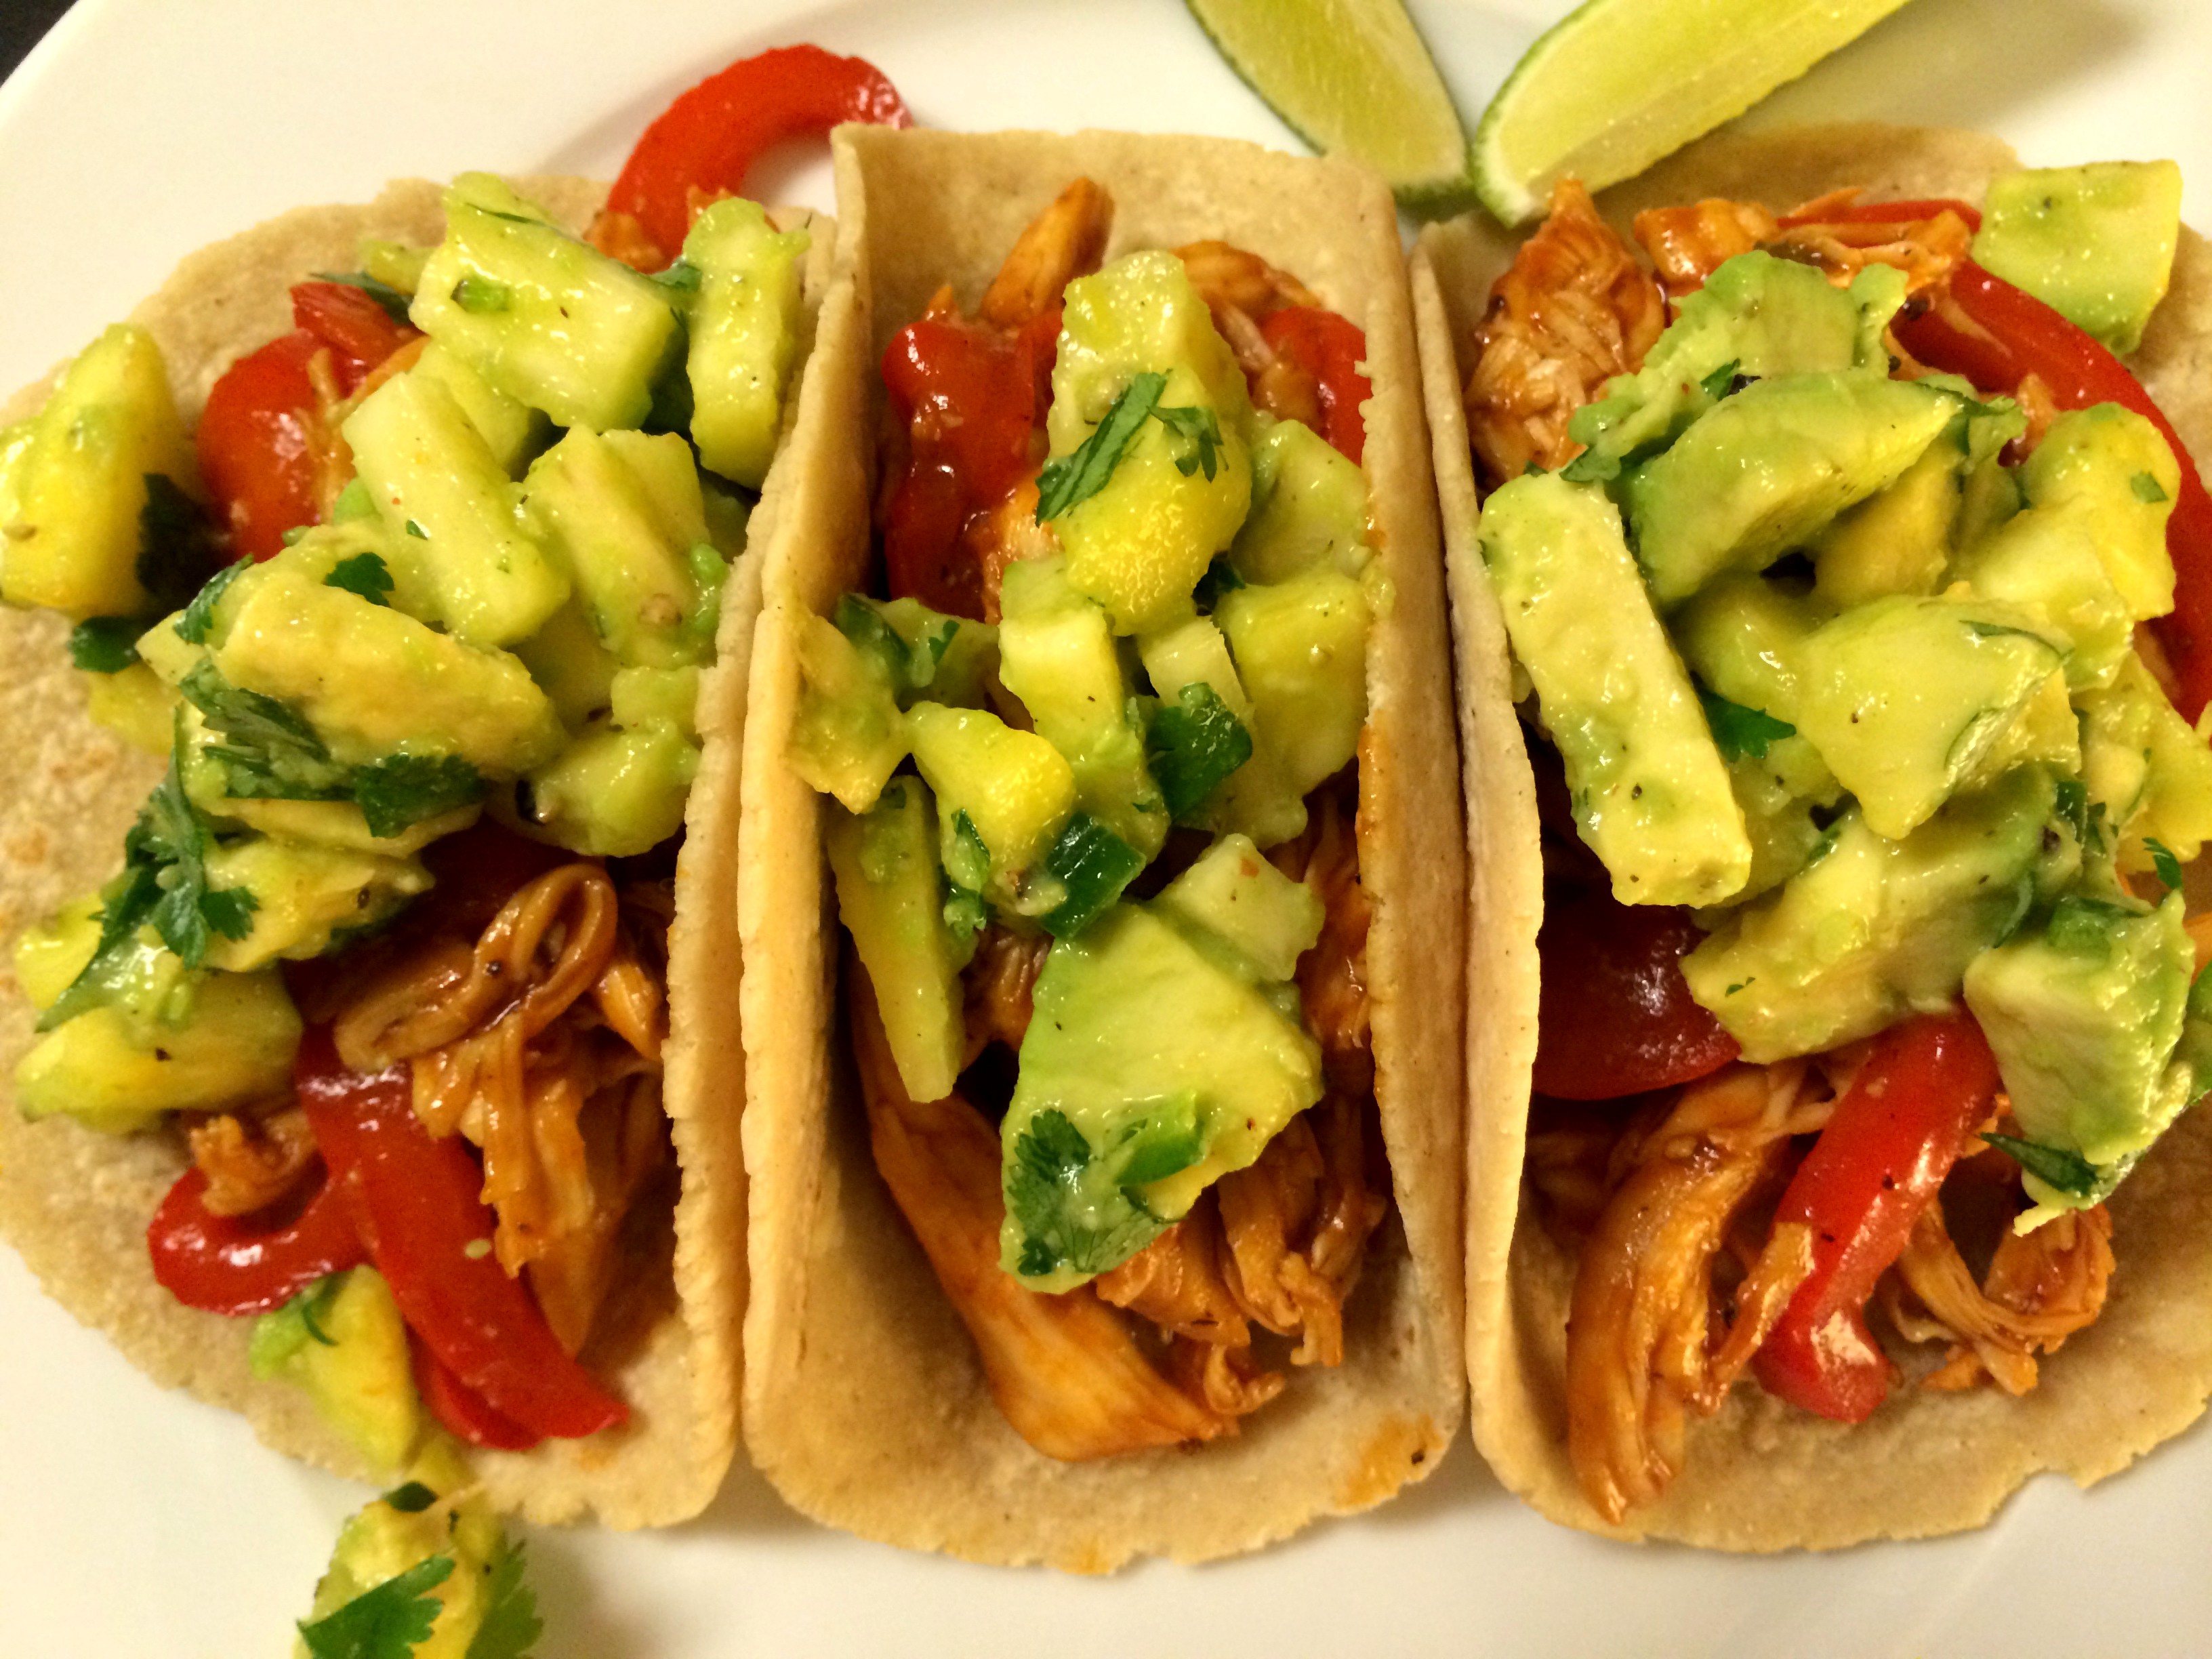 BBQ Chicken Tacos with Pineapple Avocado Salsa